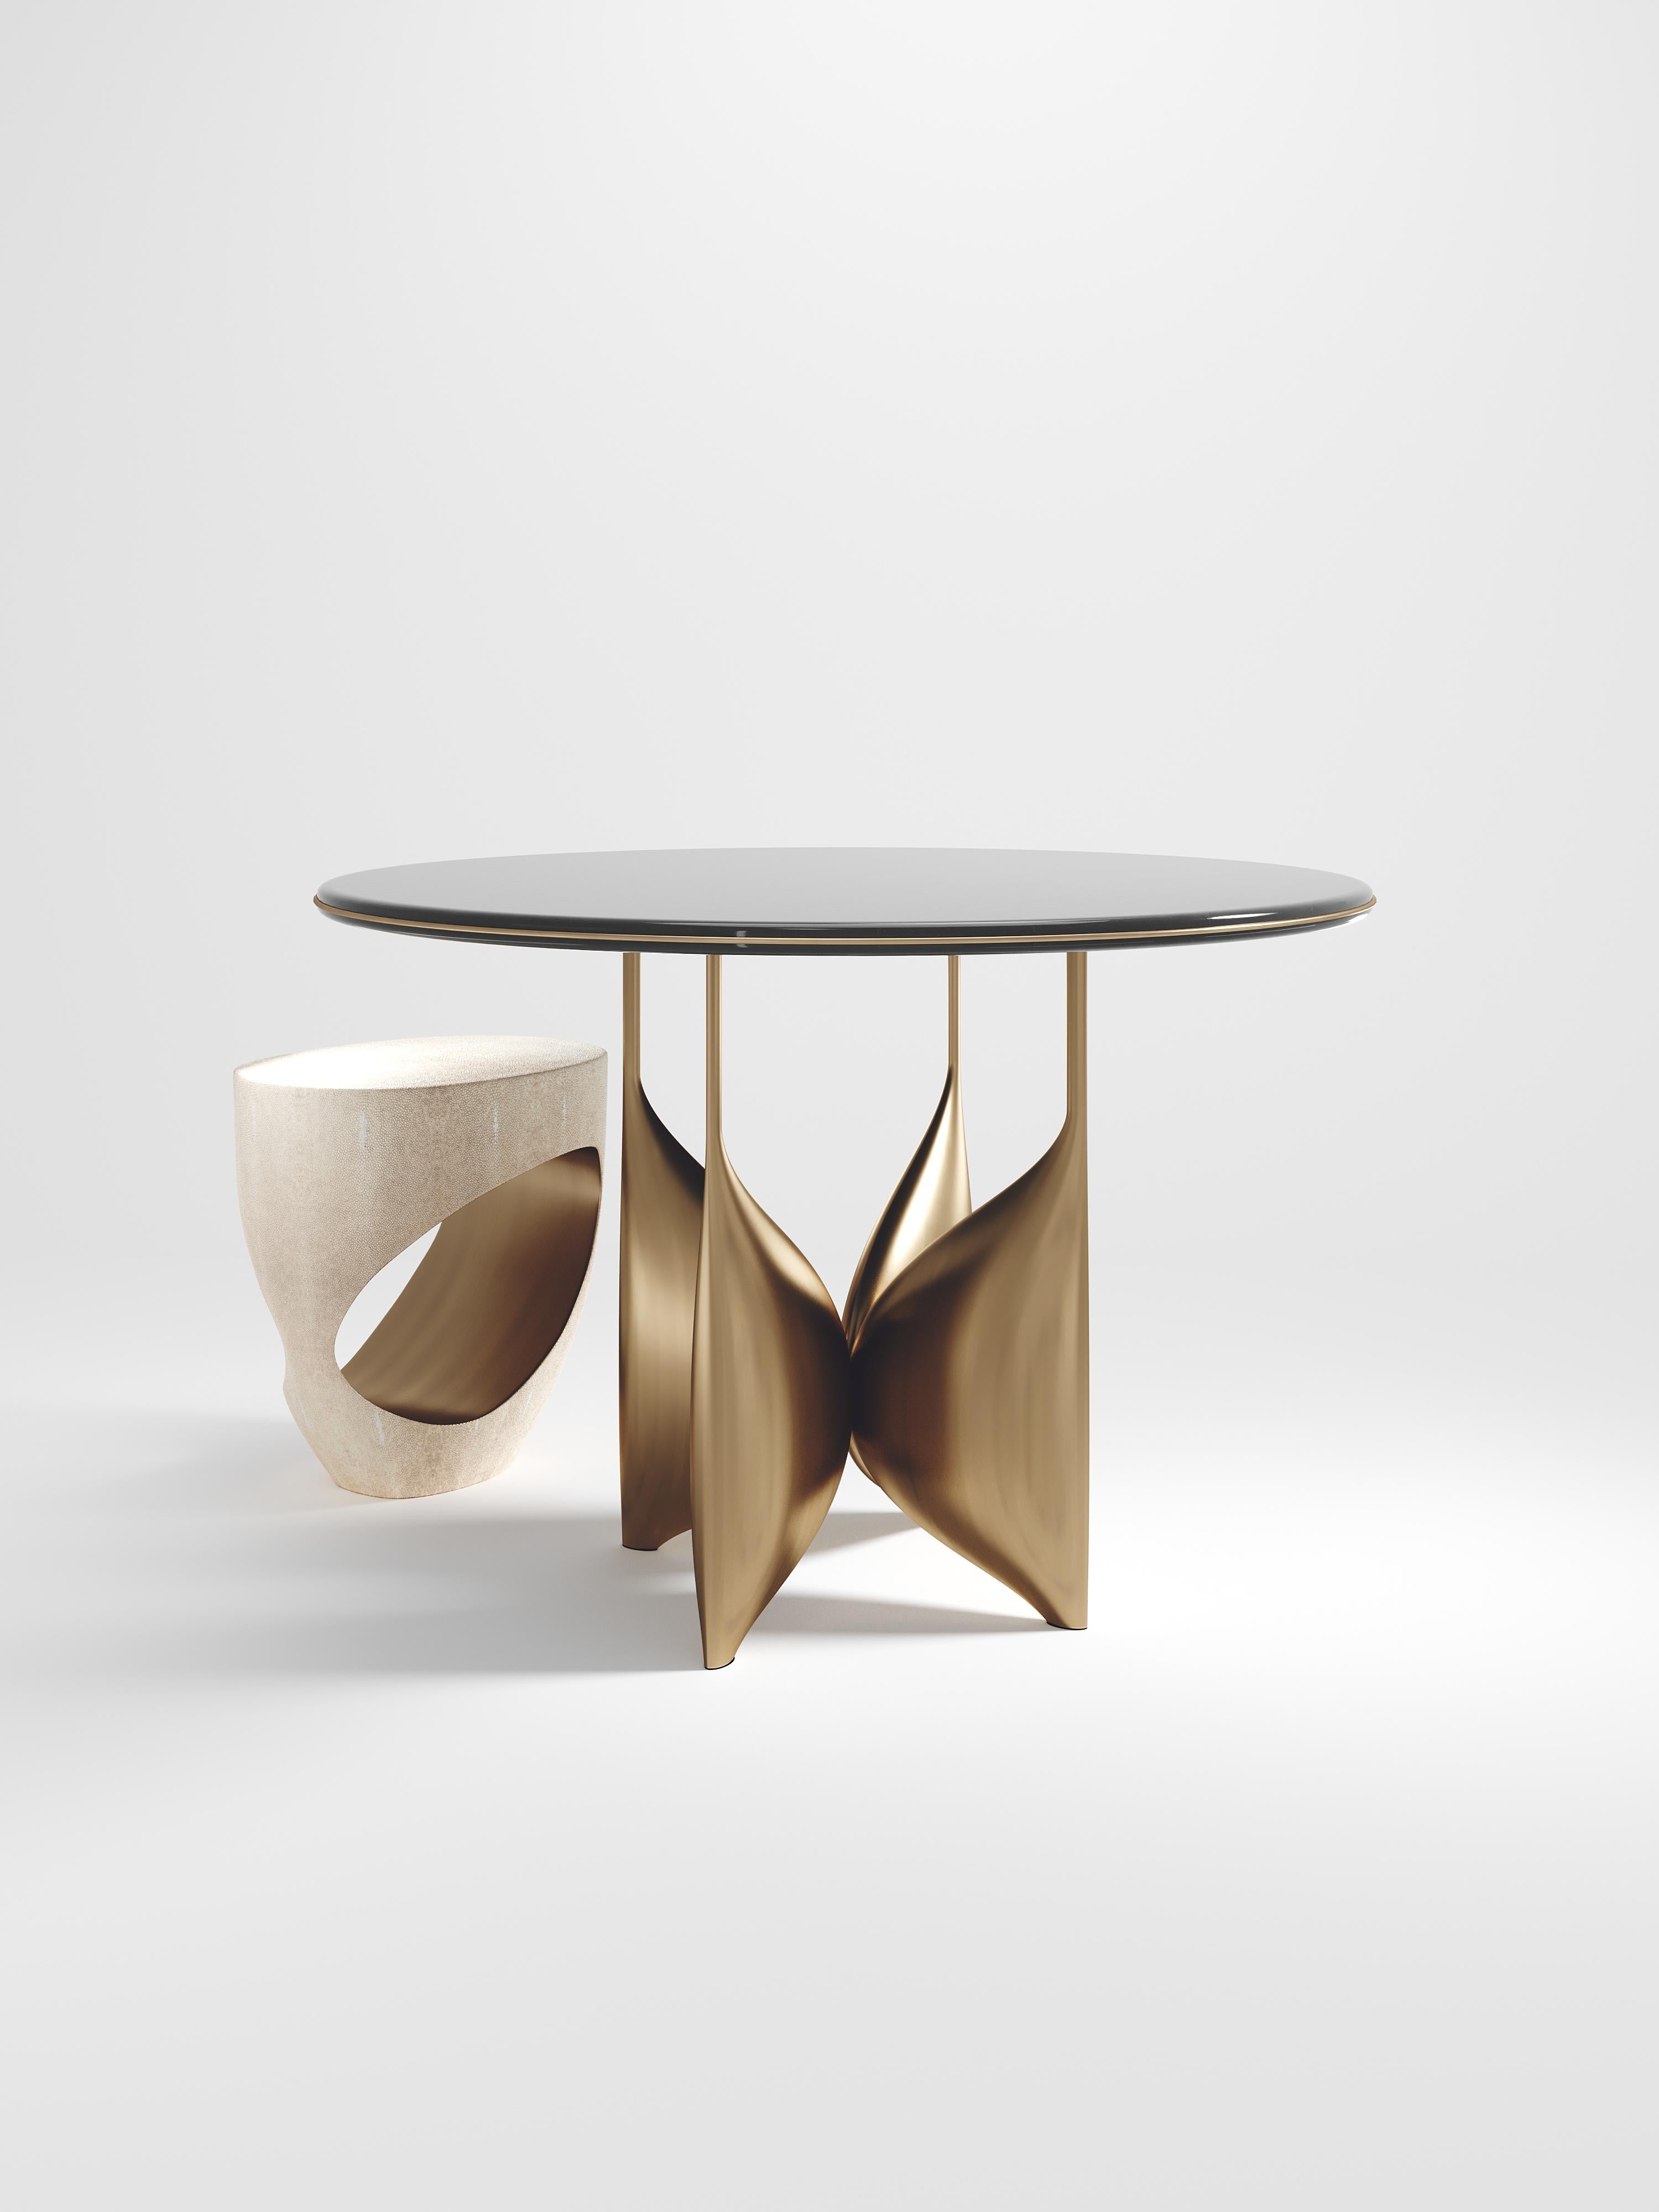 The Plumeria breakast table by Kifu Paris is a dramatic and elegant piece. The cream shagreen inlaid top sits on a sculptural bronze-patina brass base that is conceptually inspired by bird feathers floating on top of a lake. The border of the top is